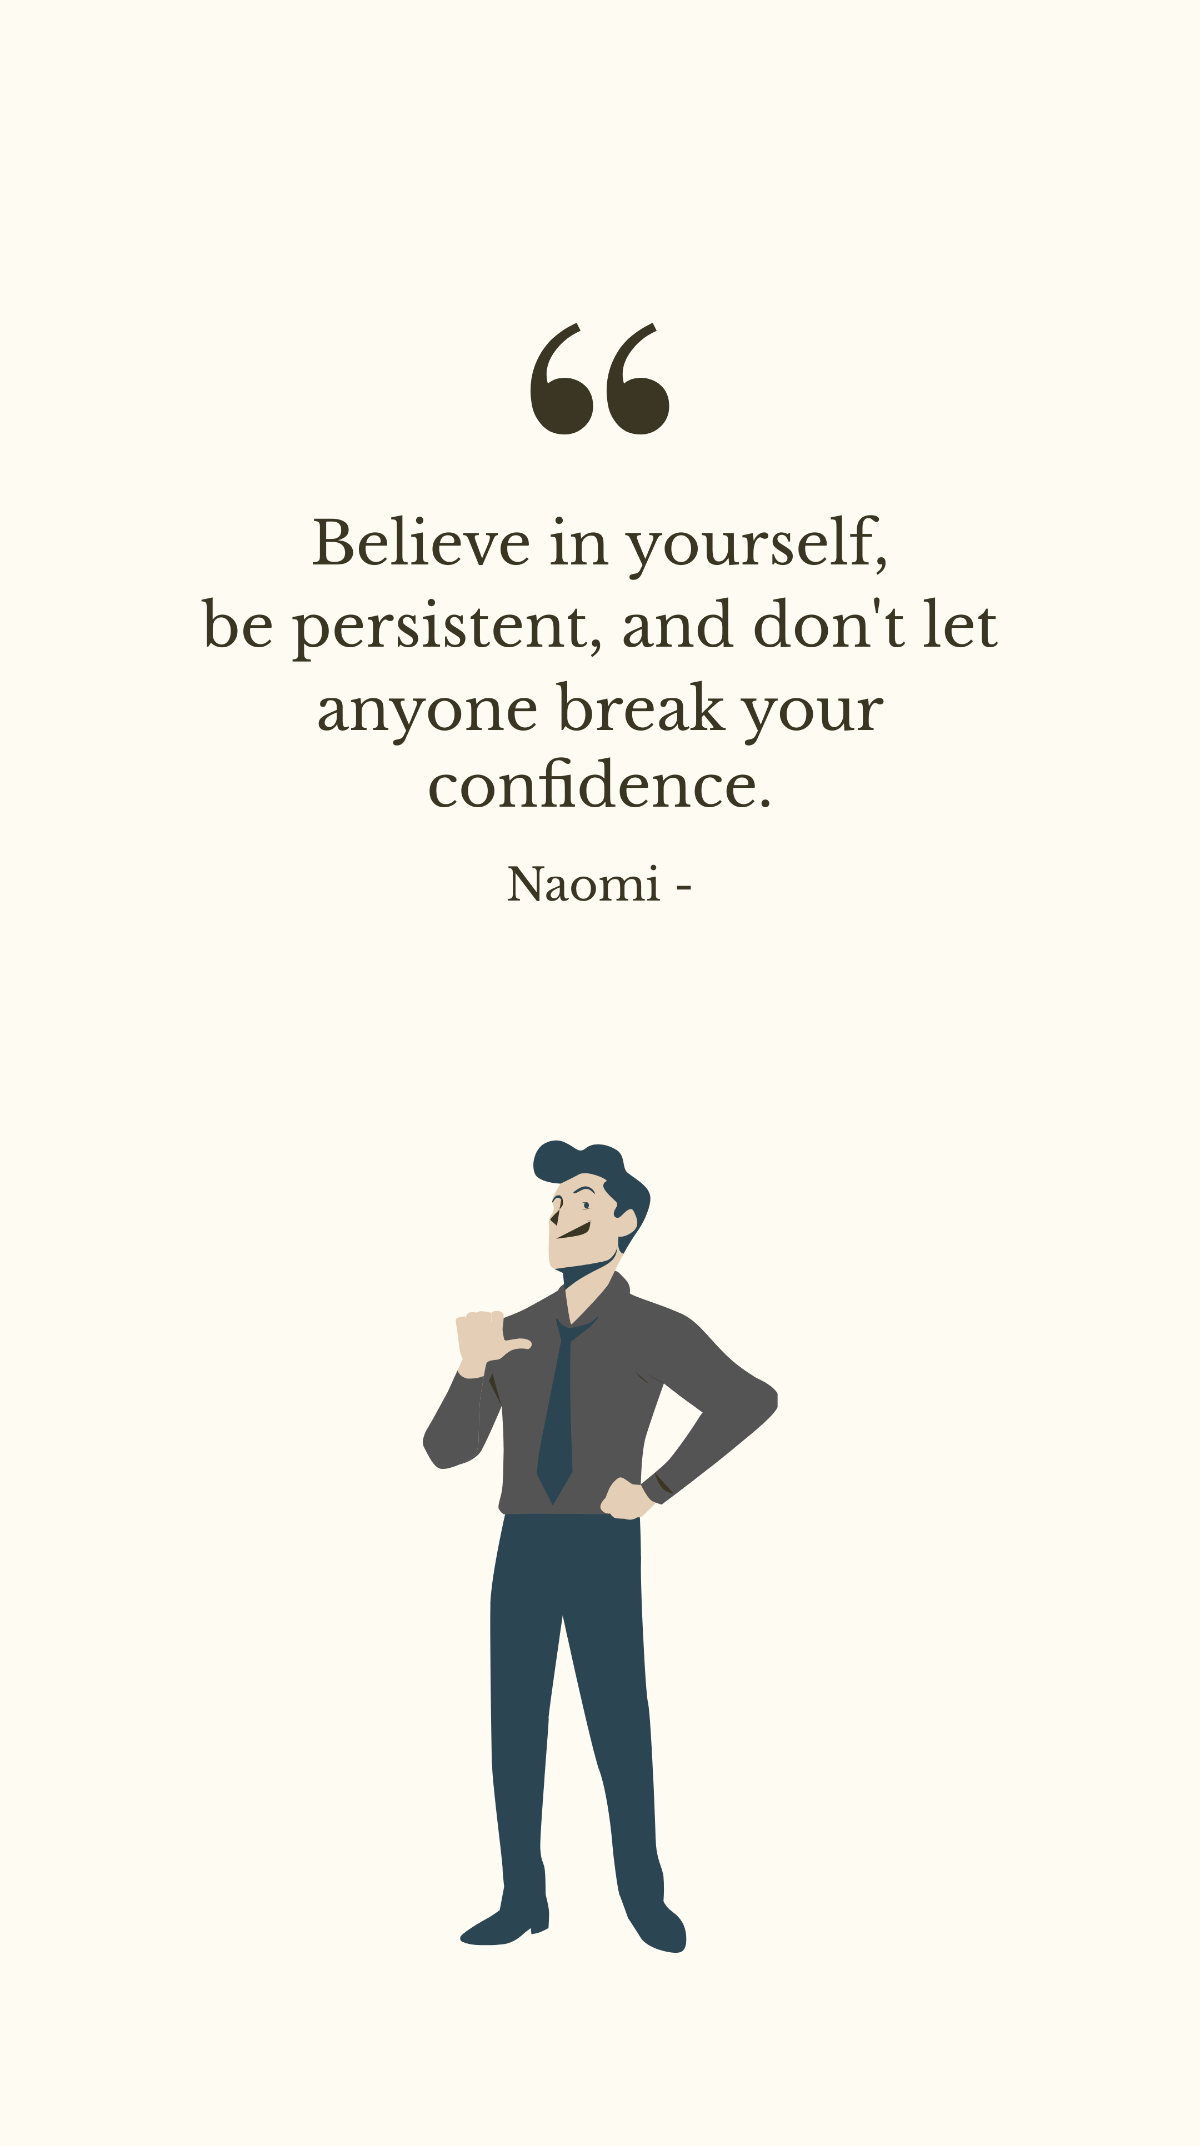 Free Naomi - Believe in yourself, be persistent, and don't let anyone break your confidence. Template